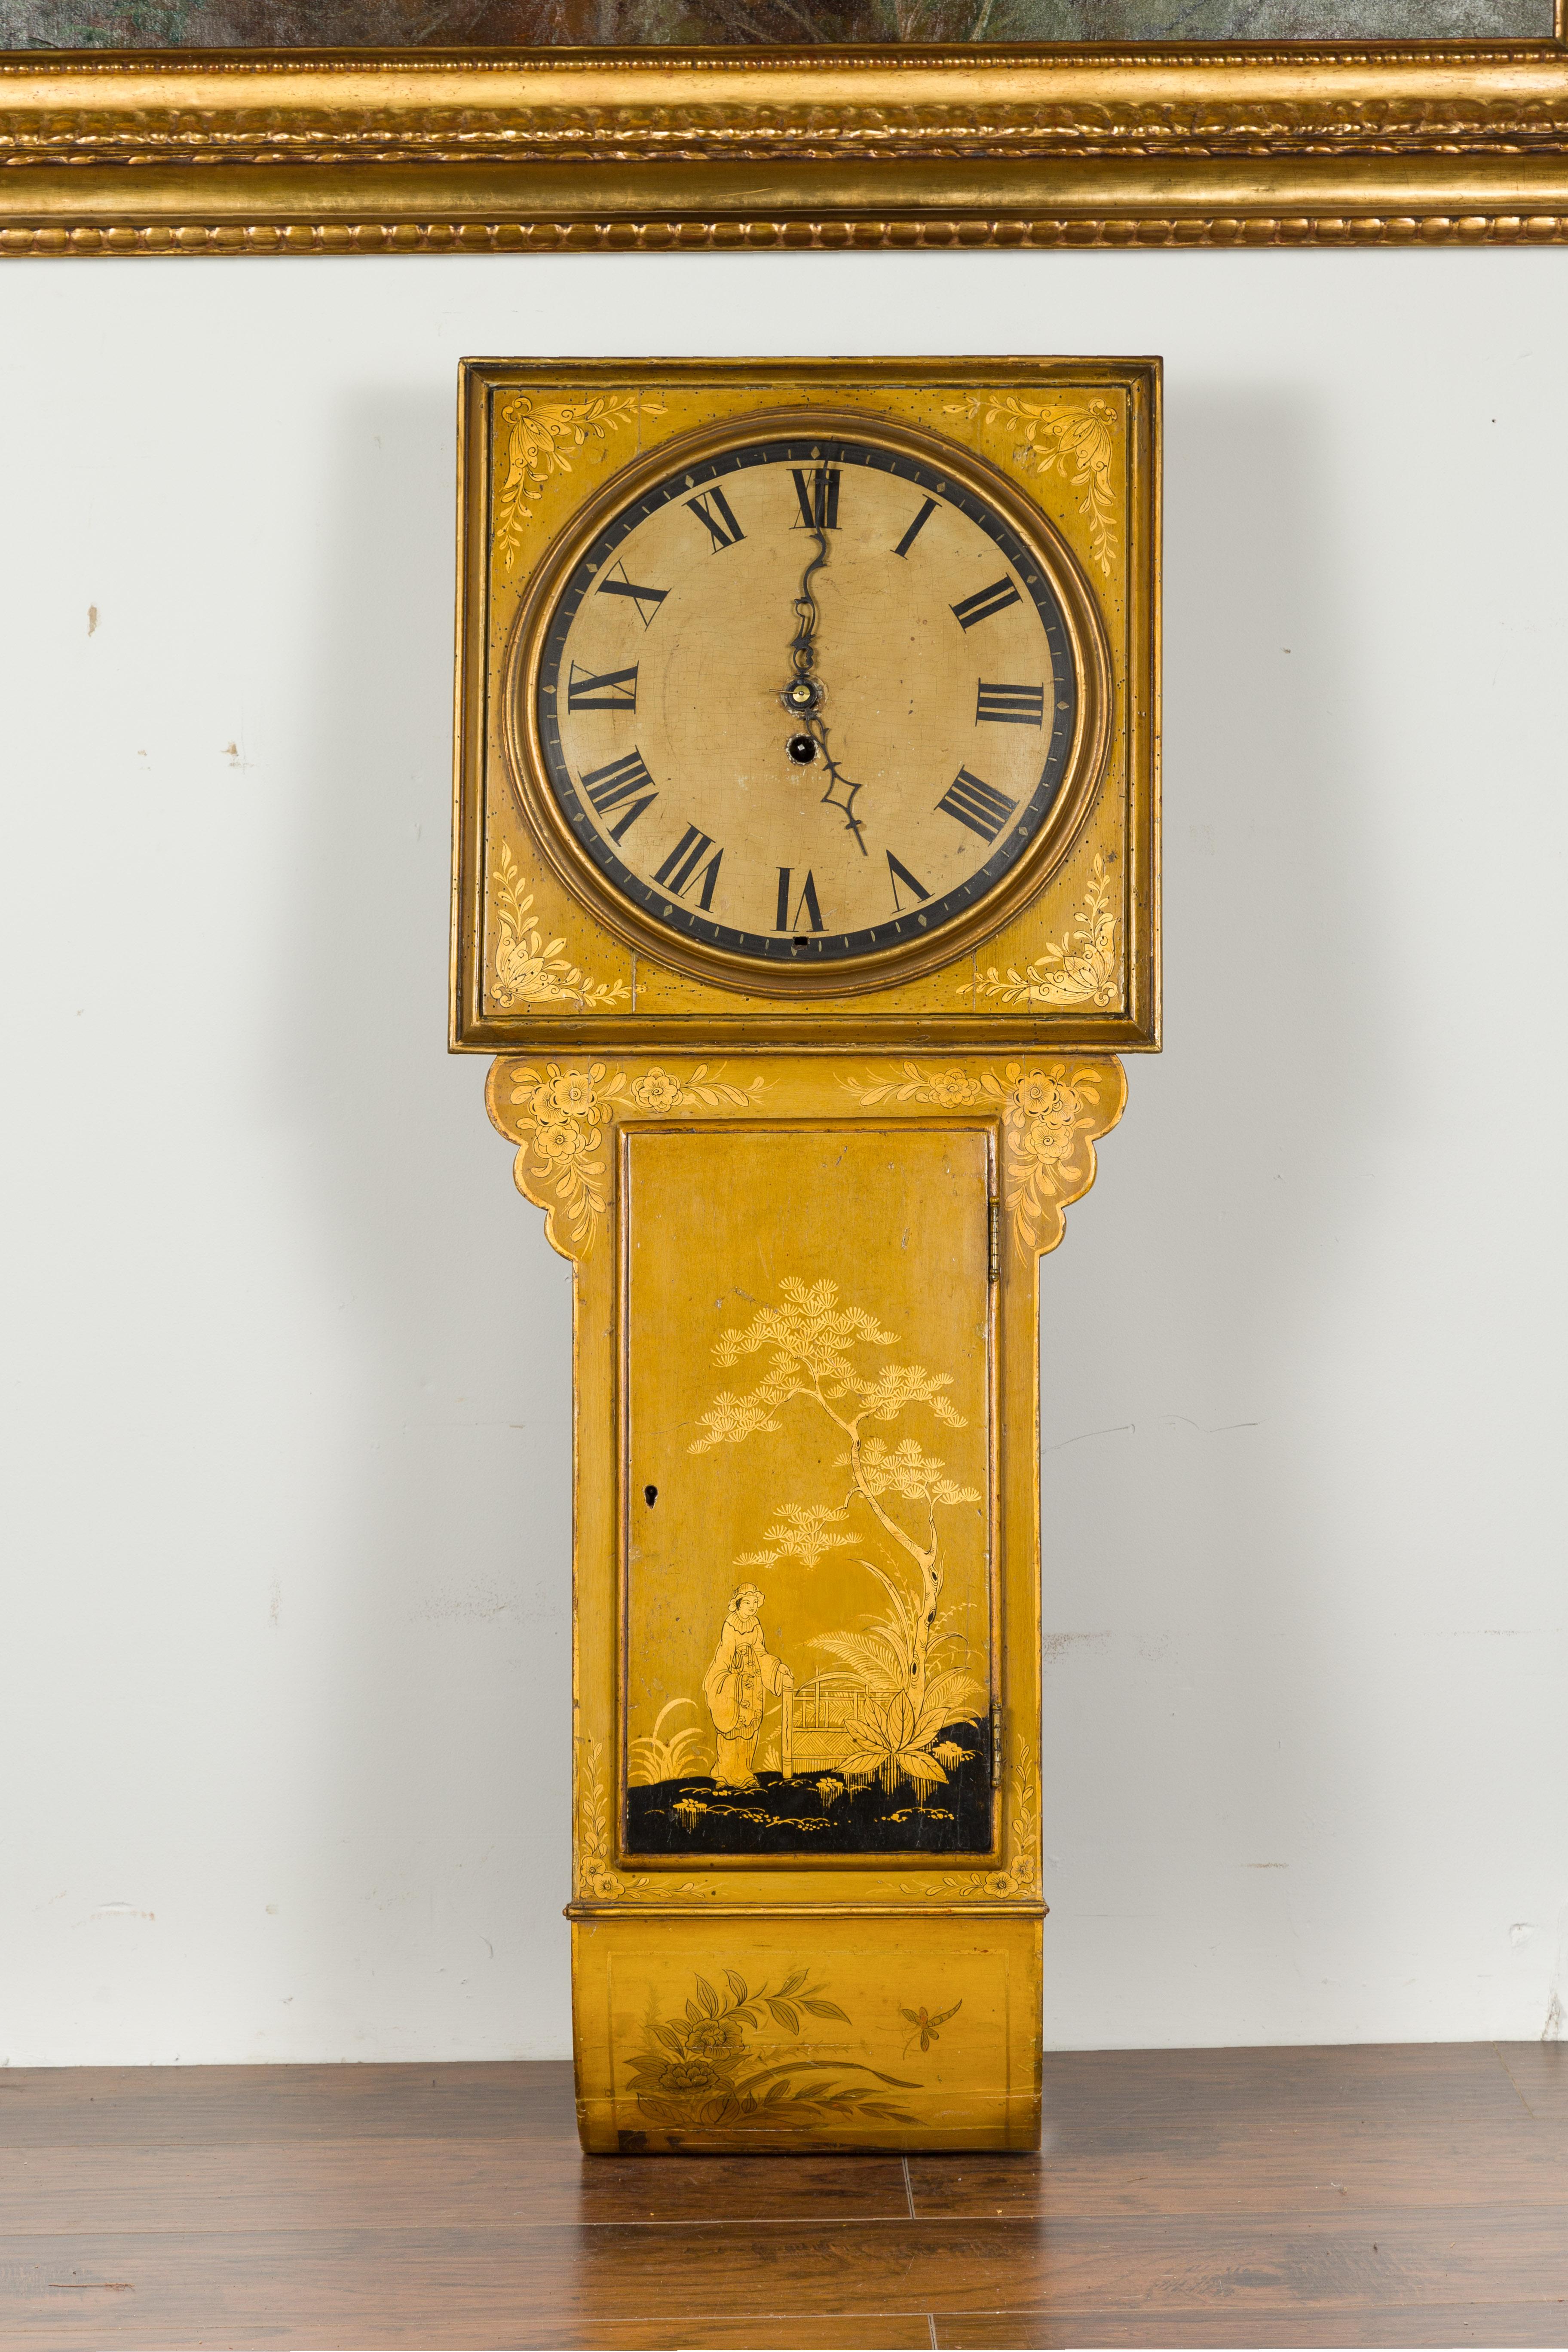 English Regency Period 1820s Golden Toned Wall Clock with Chinoiserie Décor For Sale 2